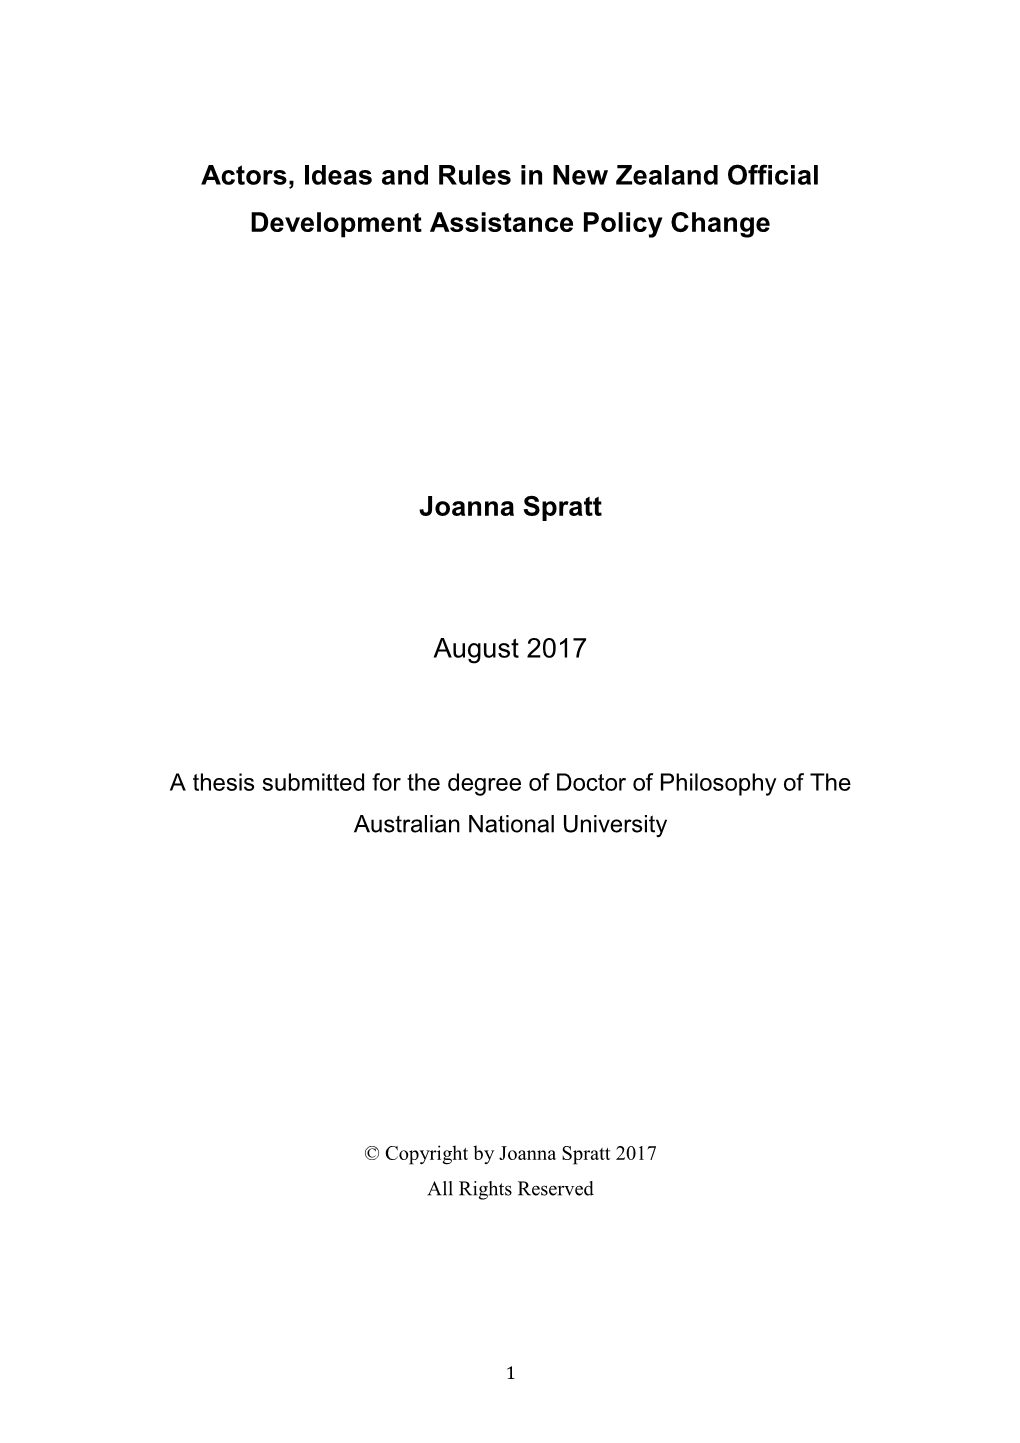 Actors, Ideas and Rules in New Zealand Official Development Assistance Policy Change